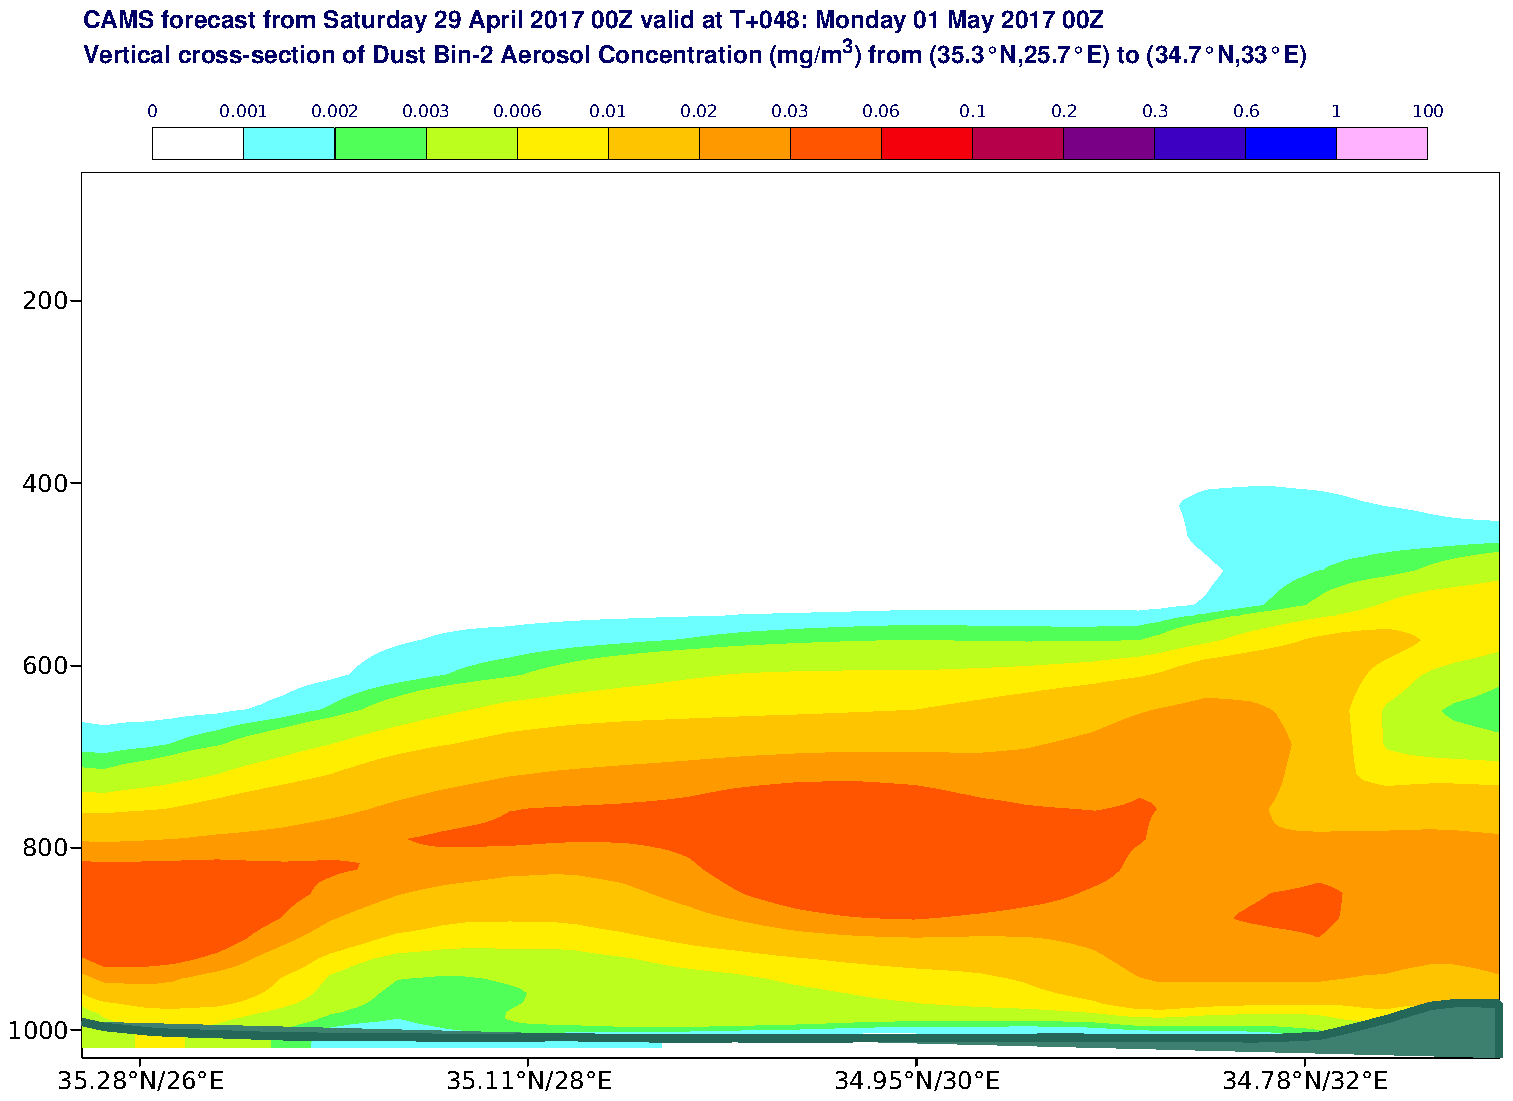 Vertical cross-section of Dust Bin-2 Aerosol Concentration (mg/m3) valid at T48 - 2017-05-01 00:00